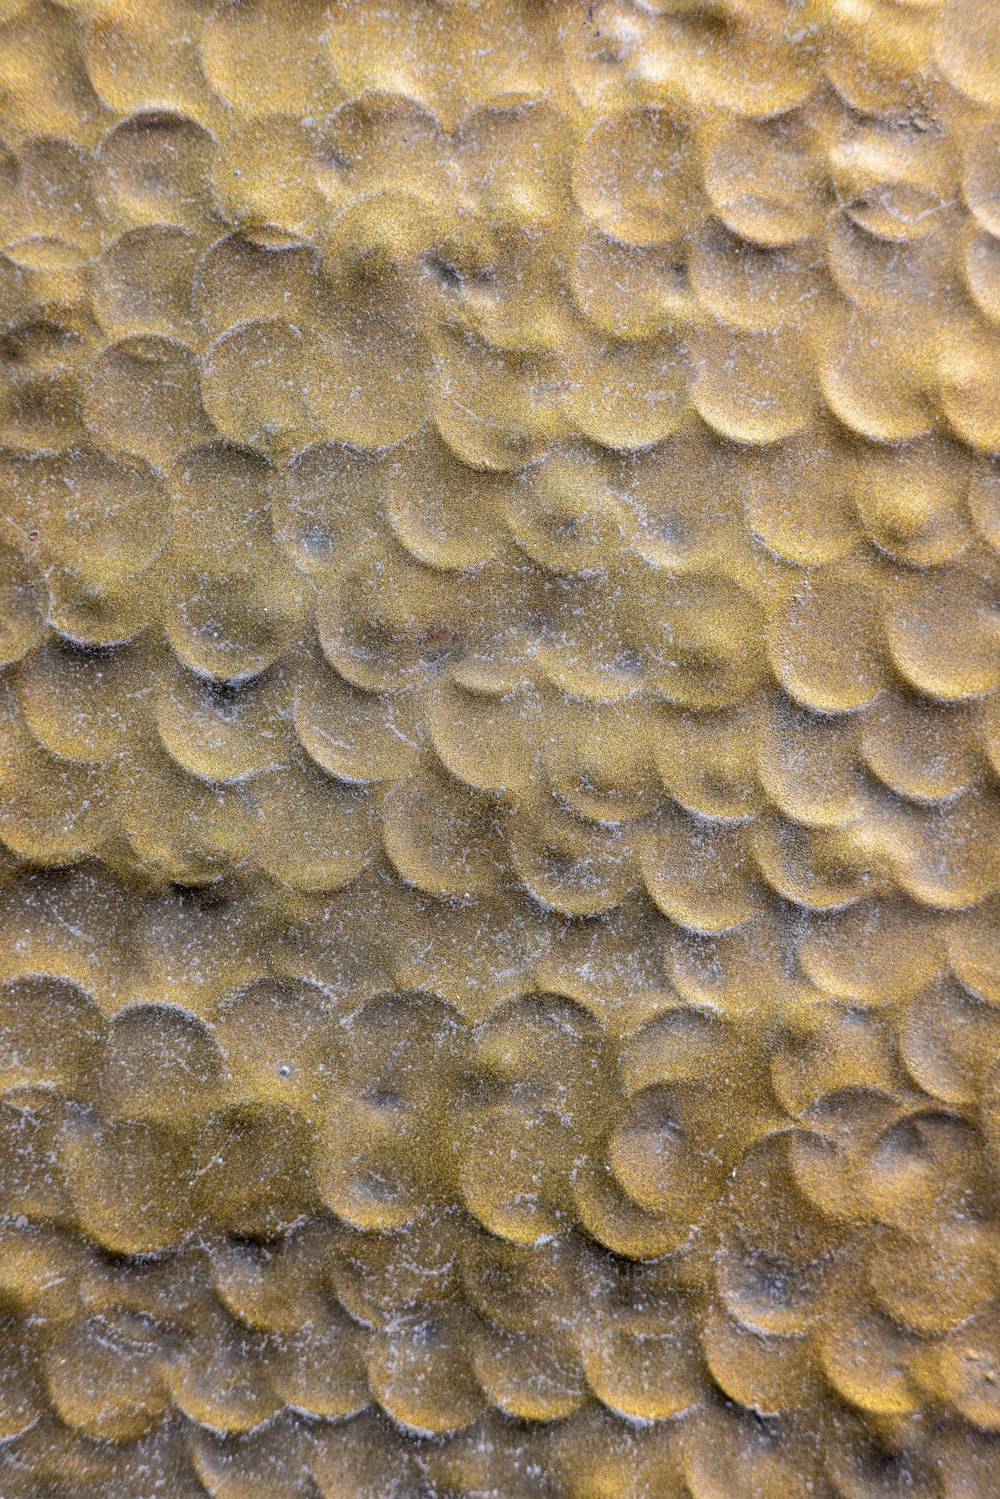 a close up of a textured surface with circles